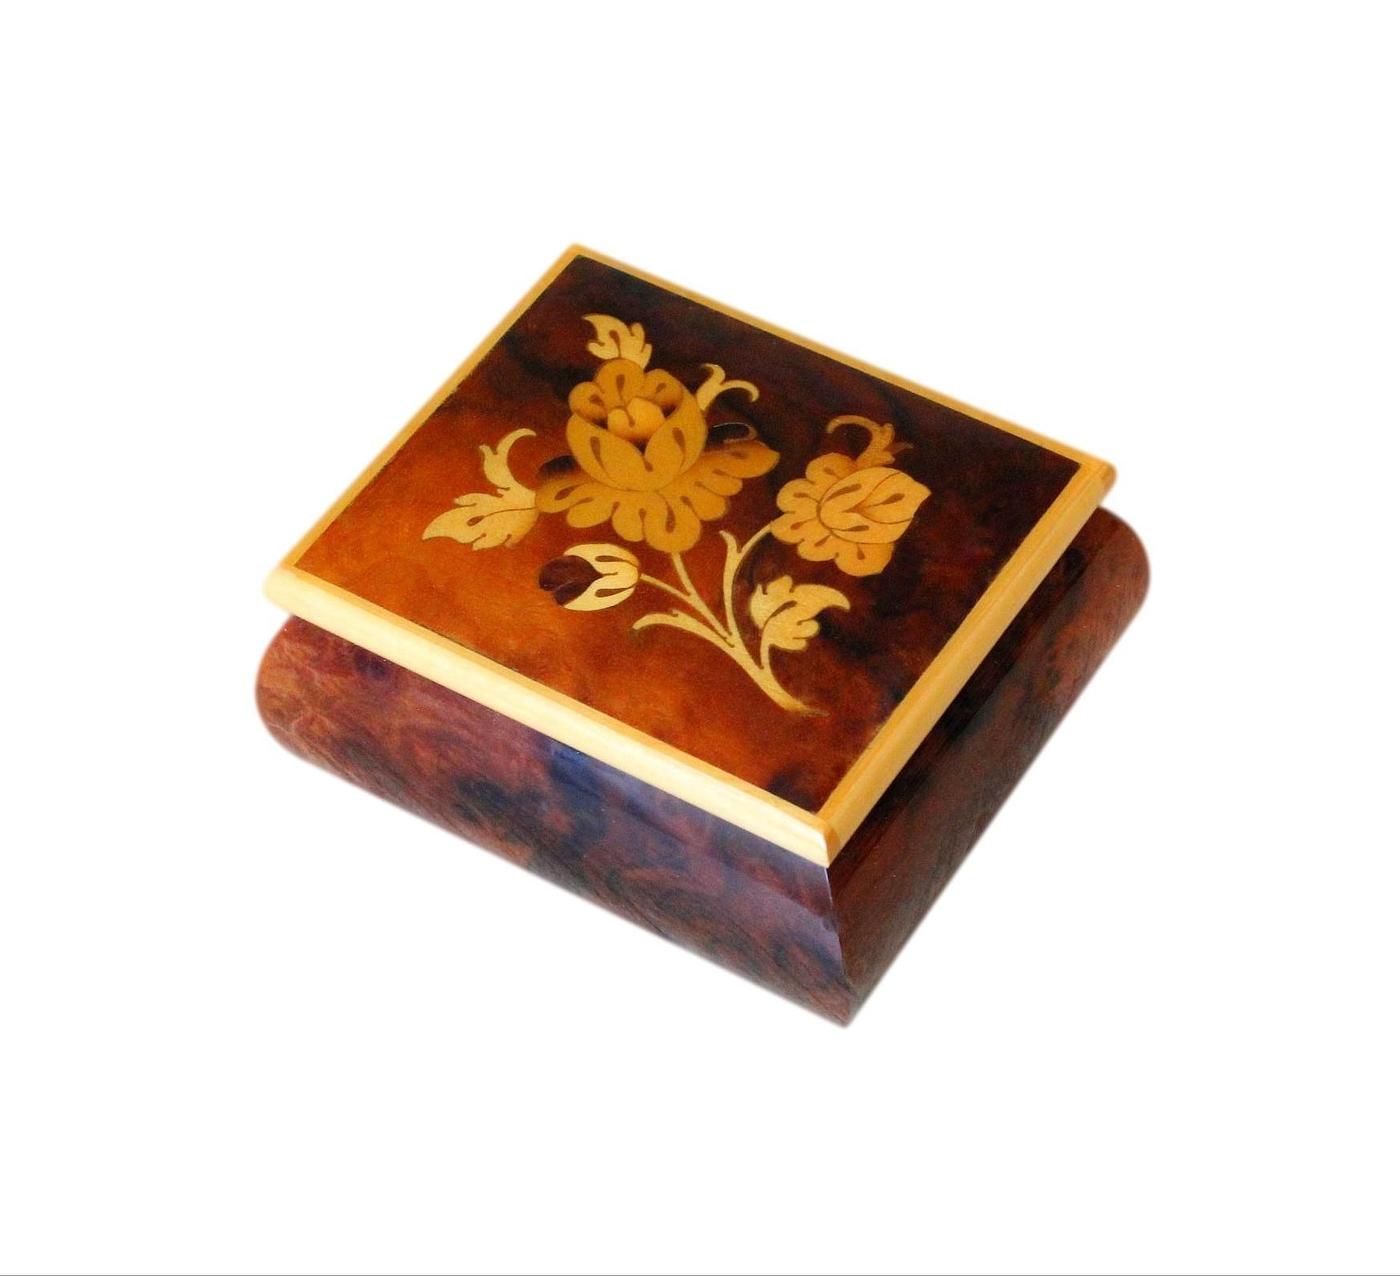 Beautifully Inlaid Small Vintage Jewellery Box From Sorrento